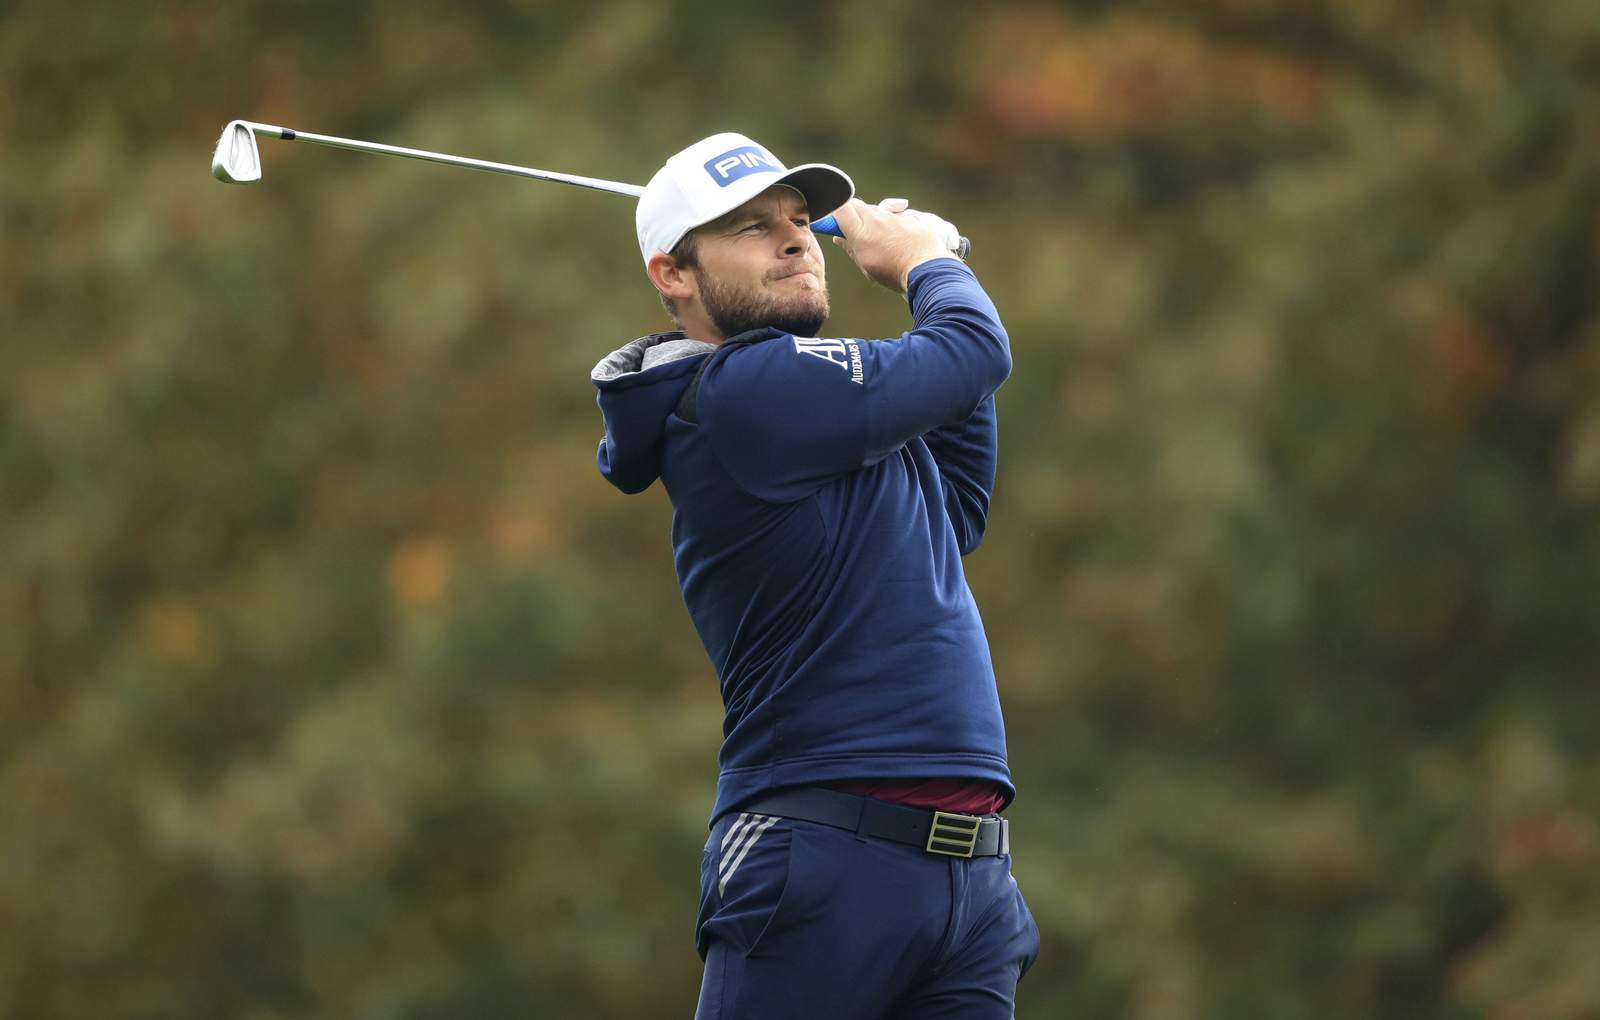 Hatton completes career goal by winning BMW PGA Championship